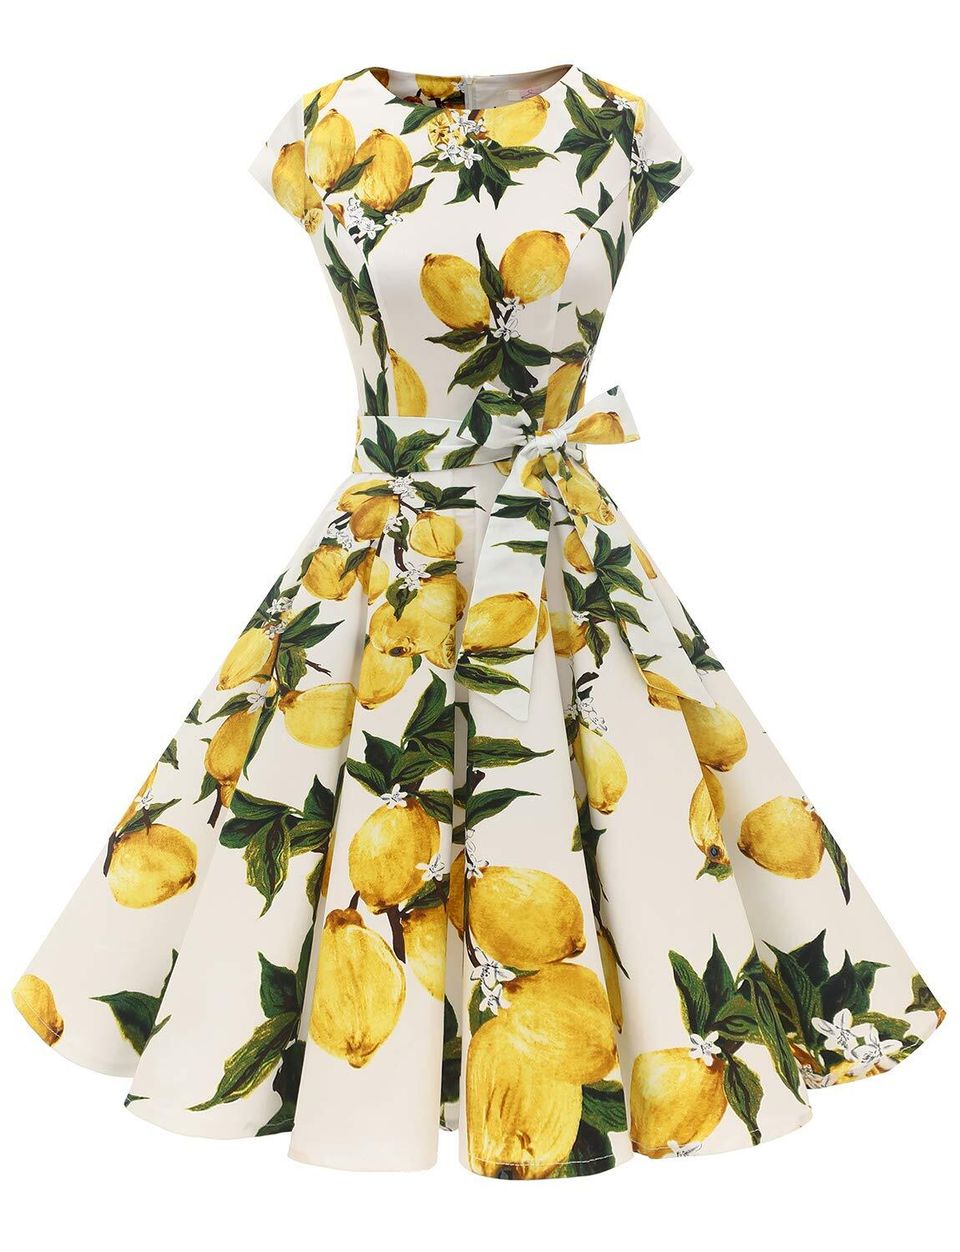 Shop The Trend: How To Wear The Lemon Print You're Seeing Everywhere |  HuffPost Life